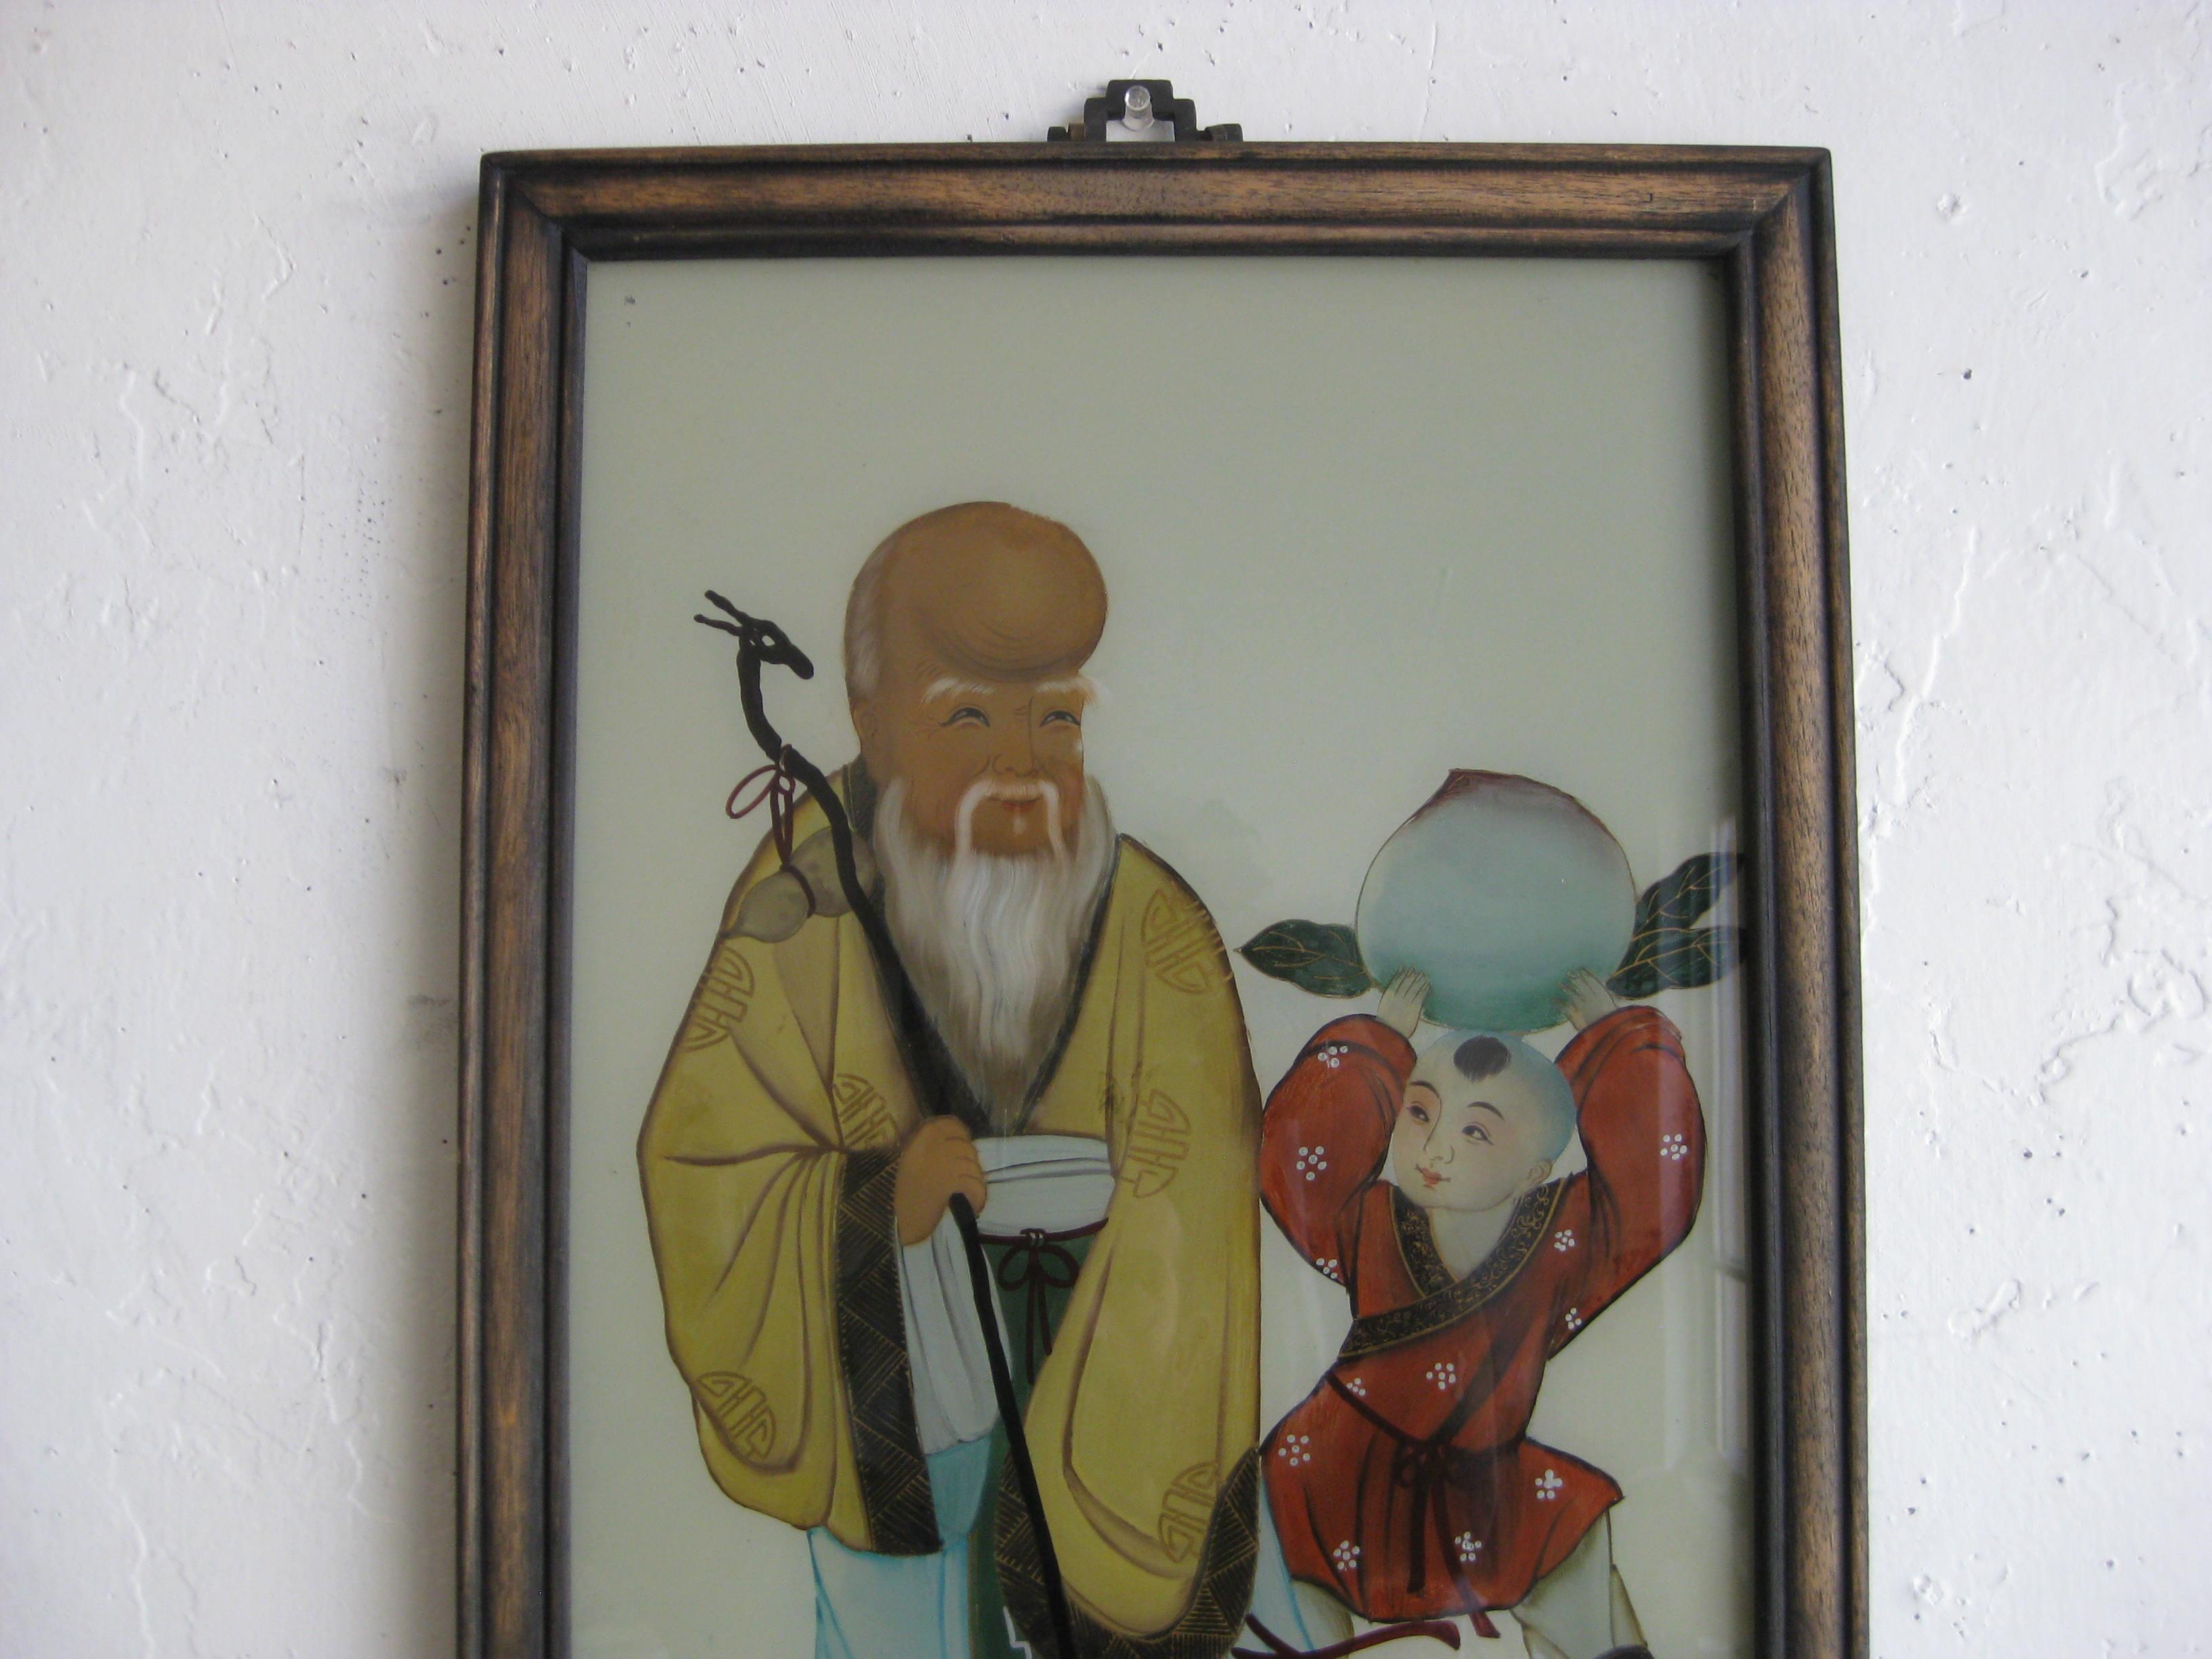 Antique Chinese hand painted reverse painting on glass. Features an Immortal and a boy holding a peach (A symbol of all things good). Great detail and color. Painting displays well and is in its original frame. In overall very nice original